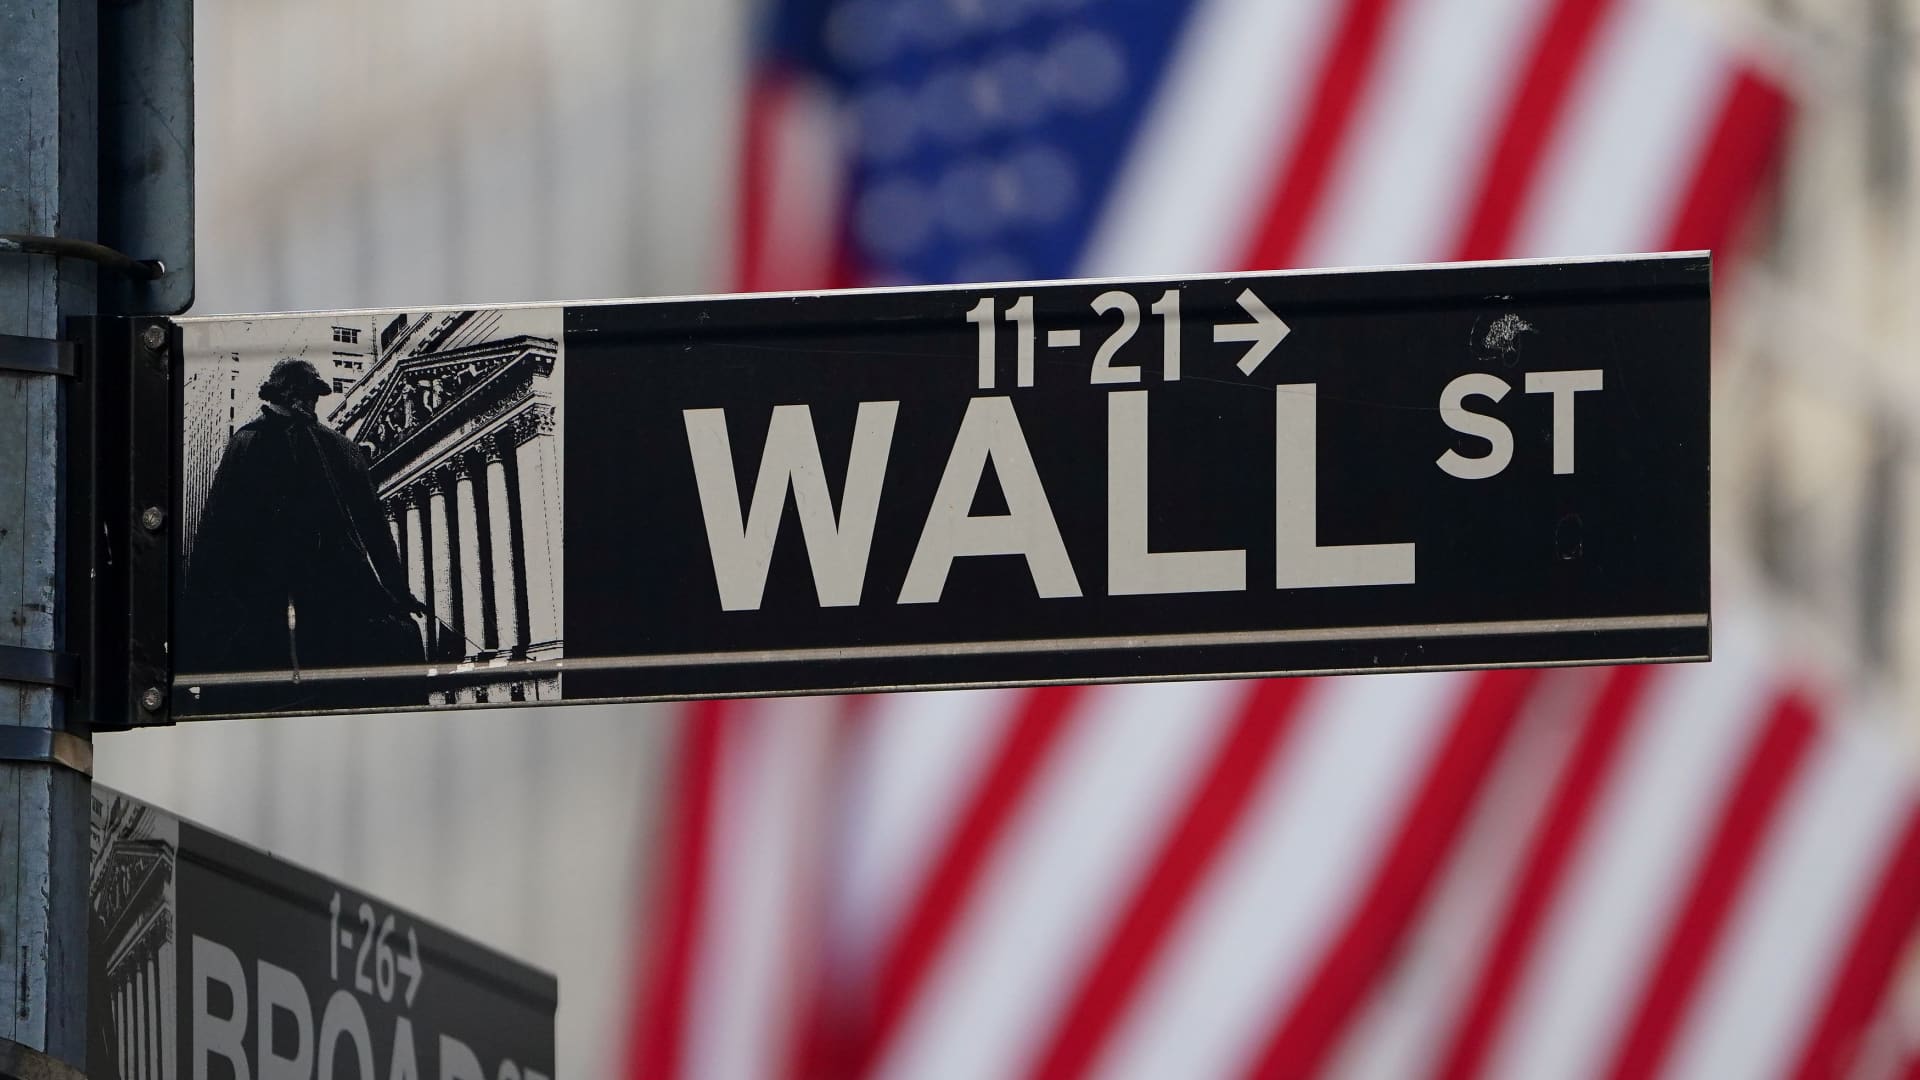 Time to sell or buy the dip? Here’s how pros suggest trading Wall Street sell-off